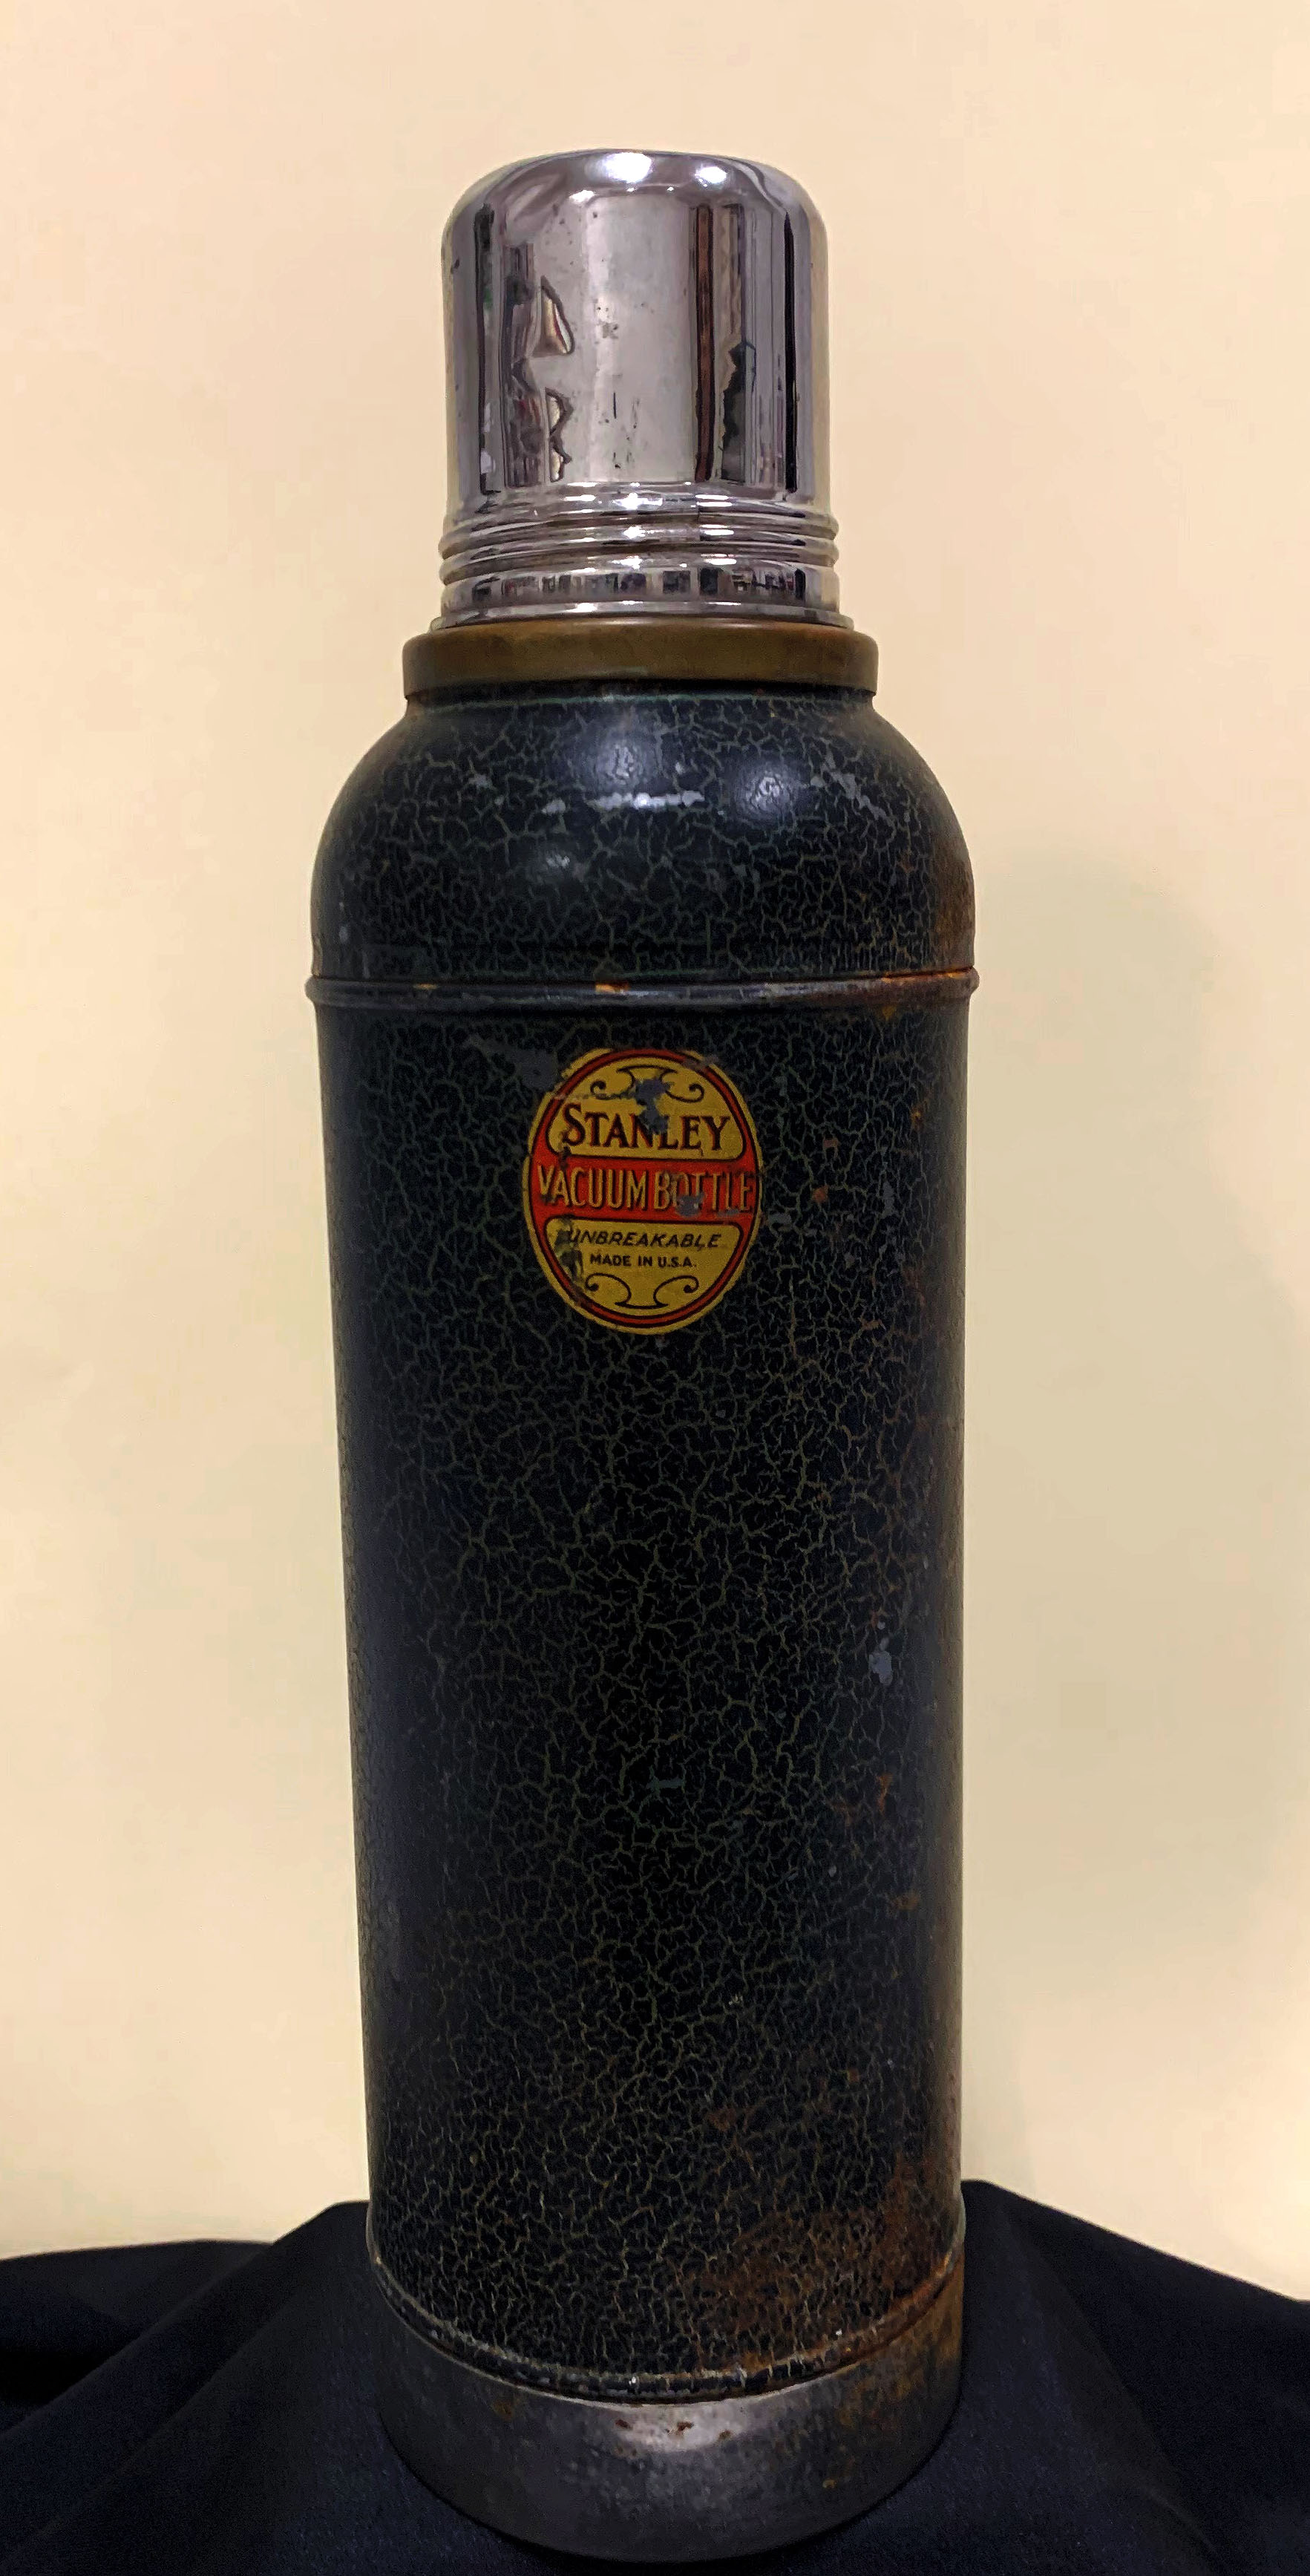 https://airandspace.si.edu/sites/default/files/2023-06/SMO%20Earhart%20Thermos.jpg